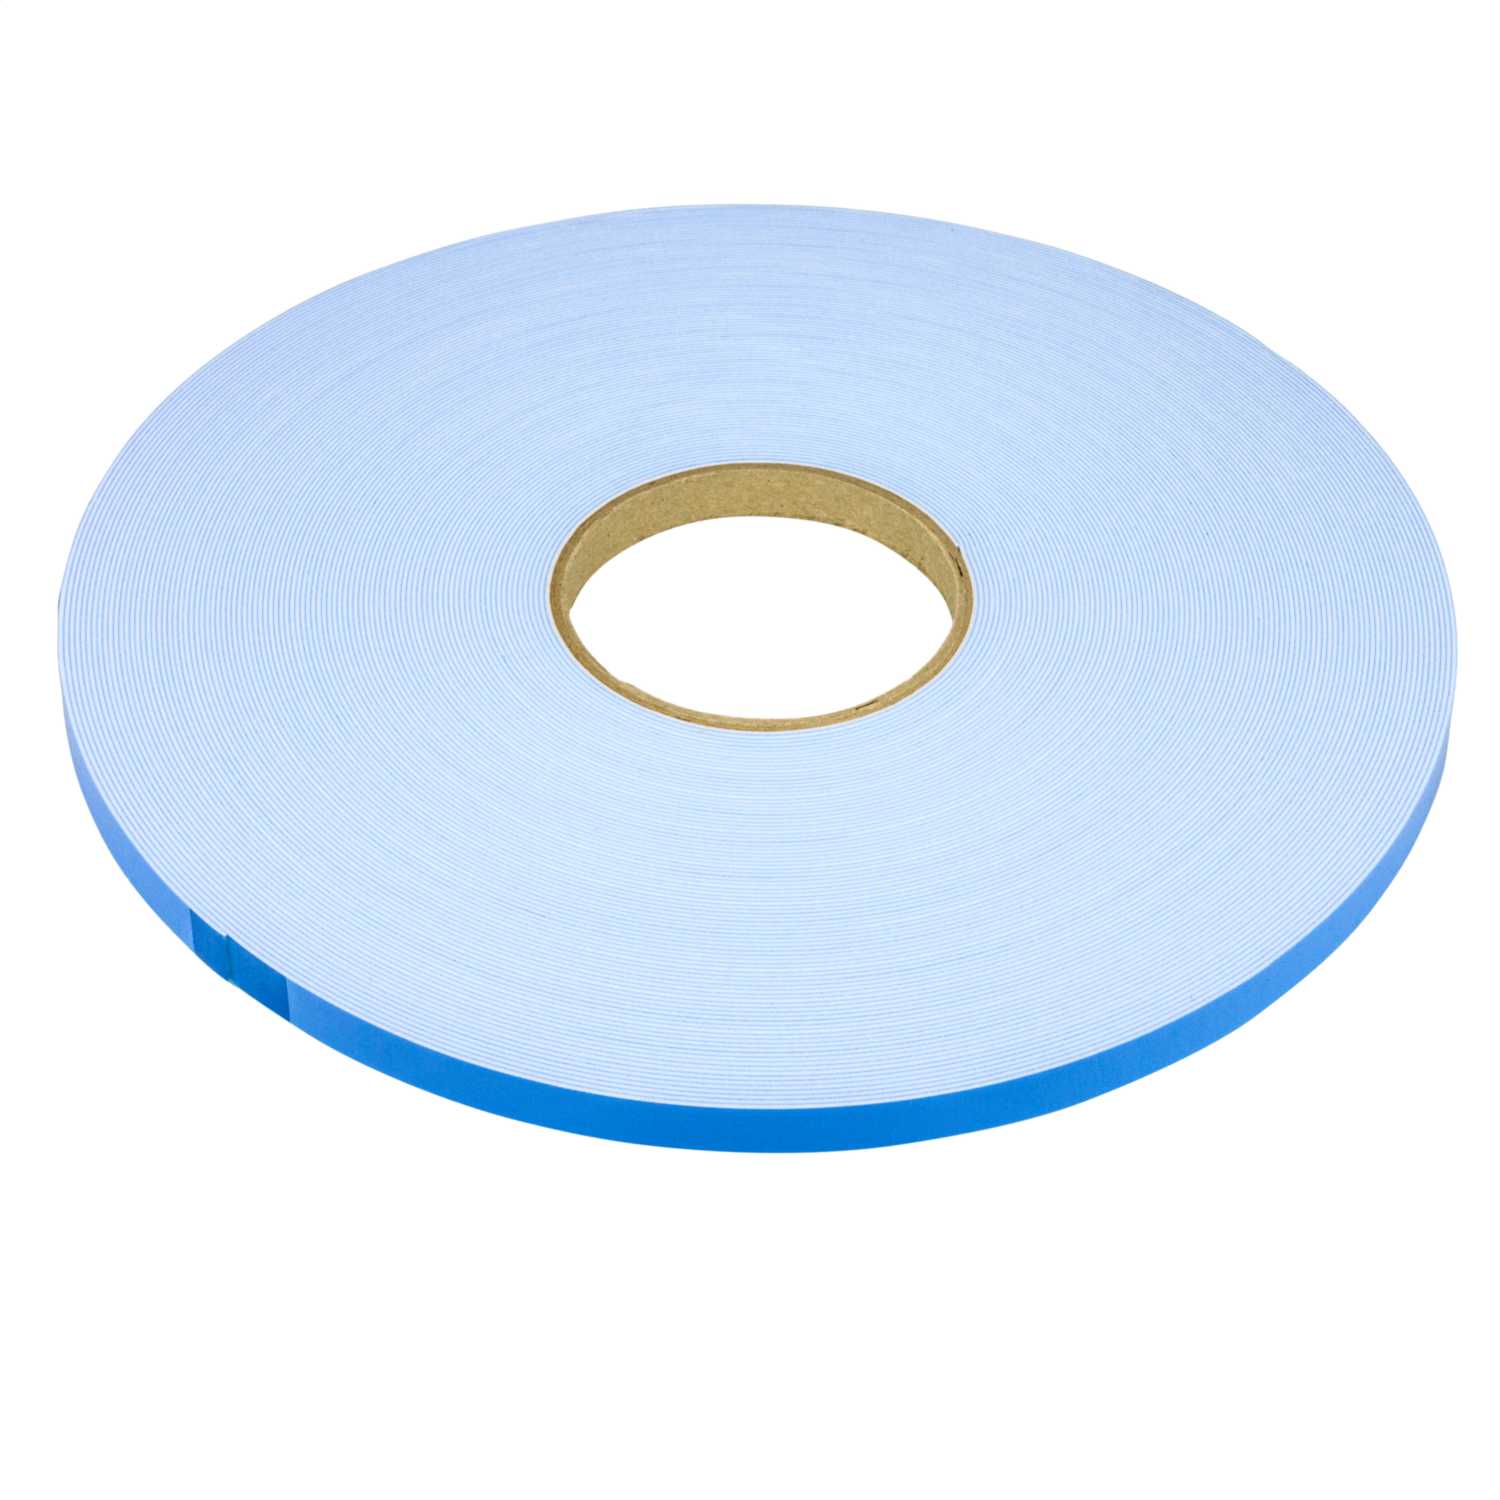 Centaur 12mm Double Sided Self Adhesive Foam Tape Sold In 1 S St 1 Cef